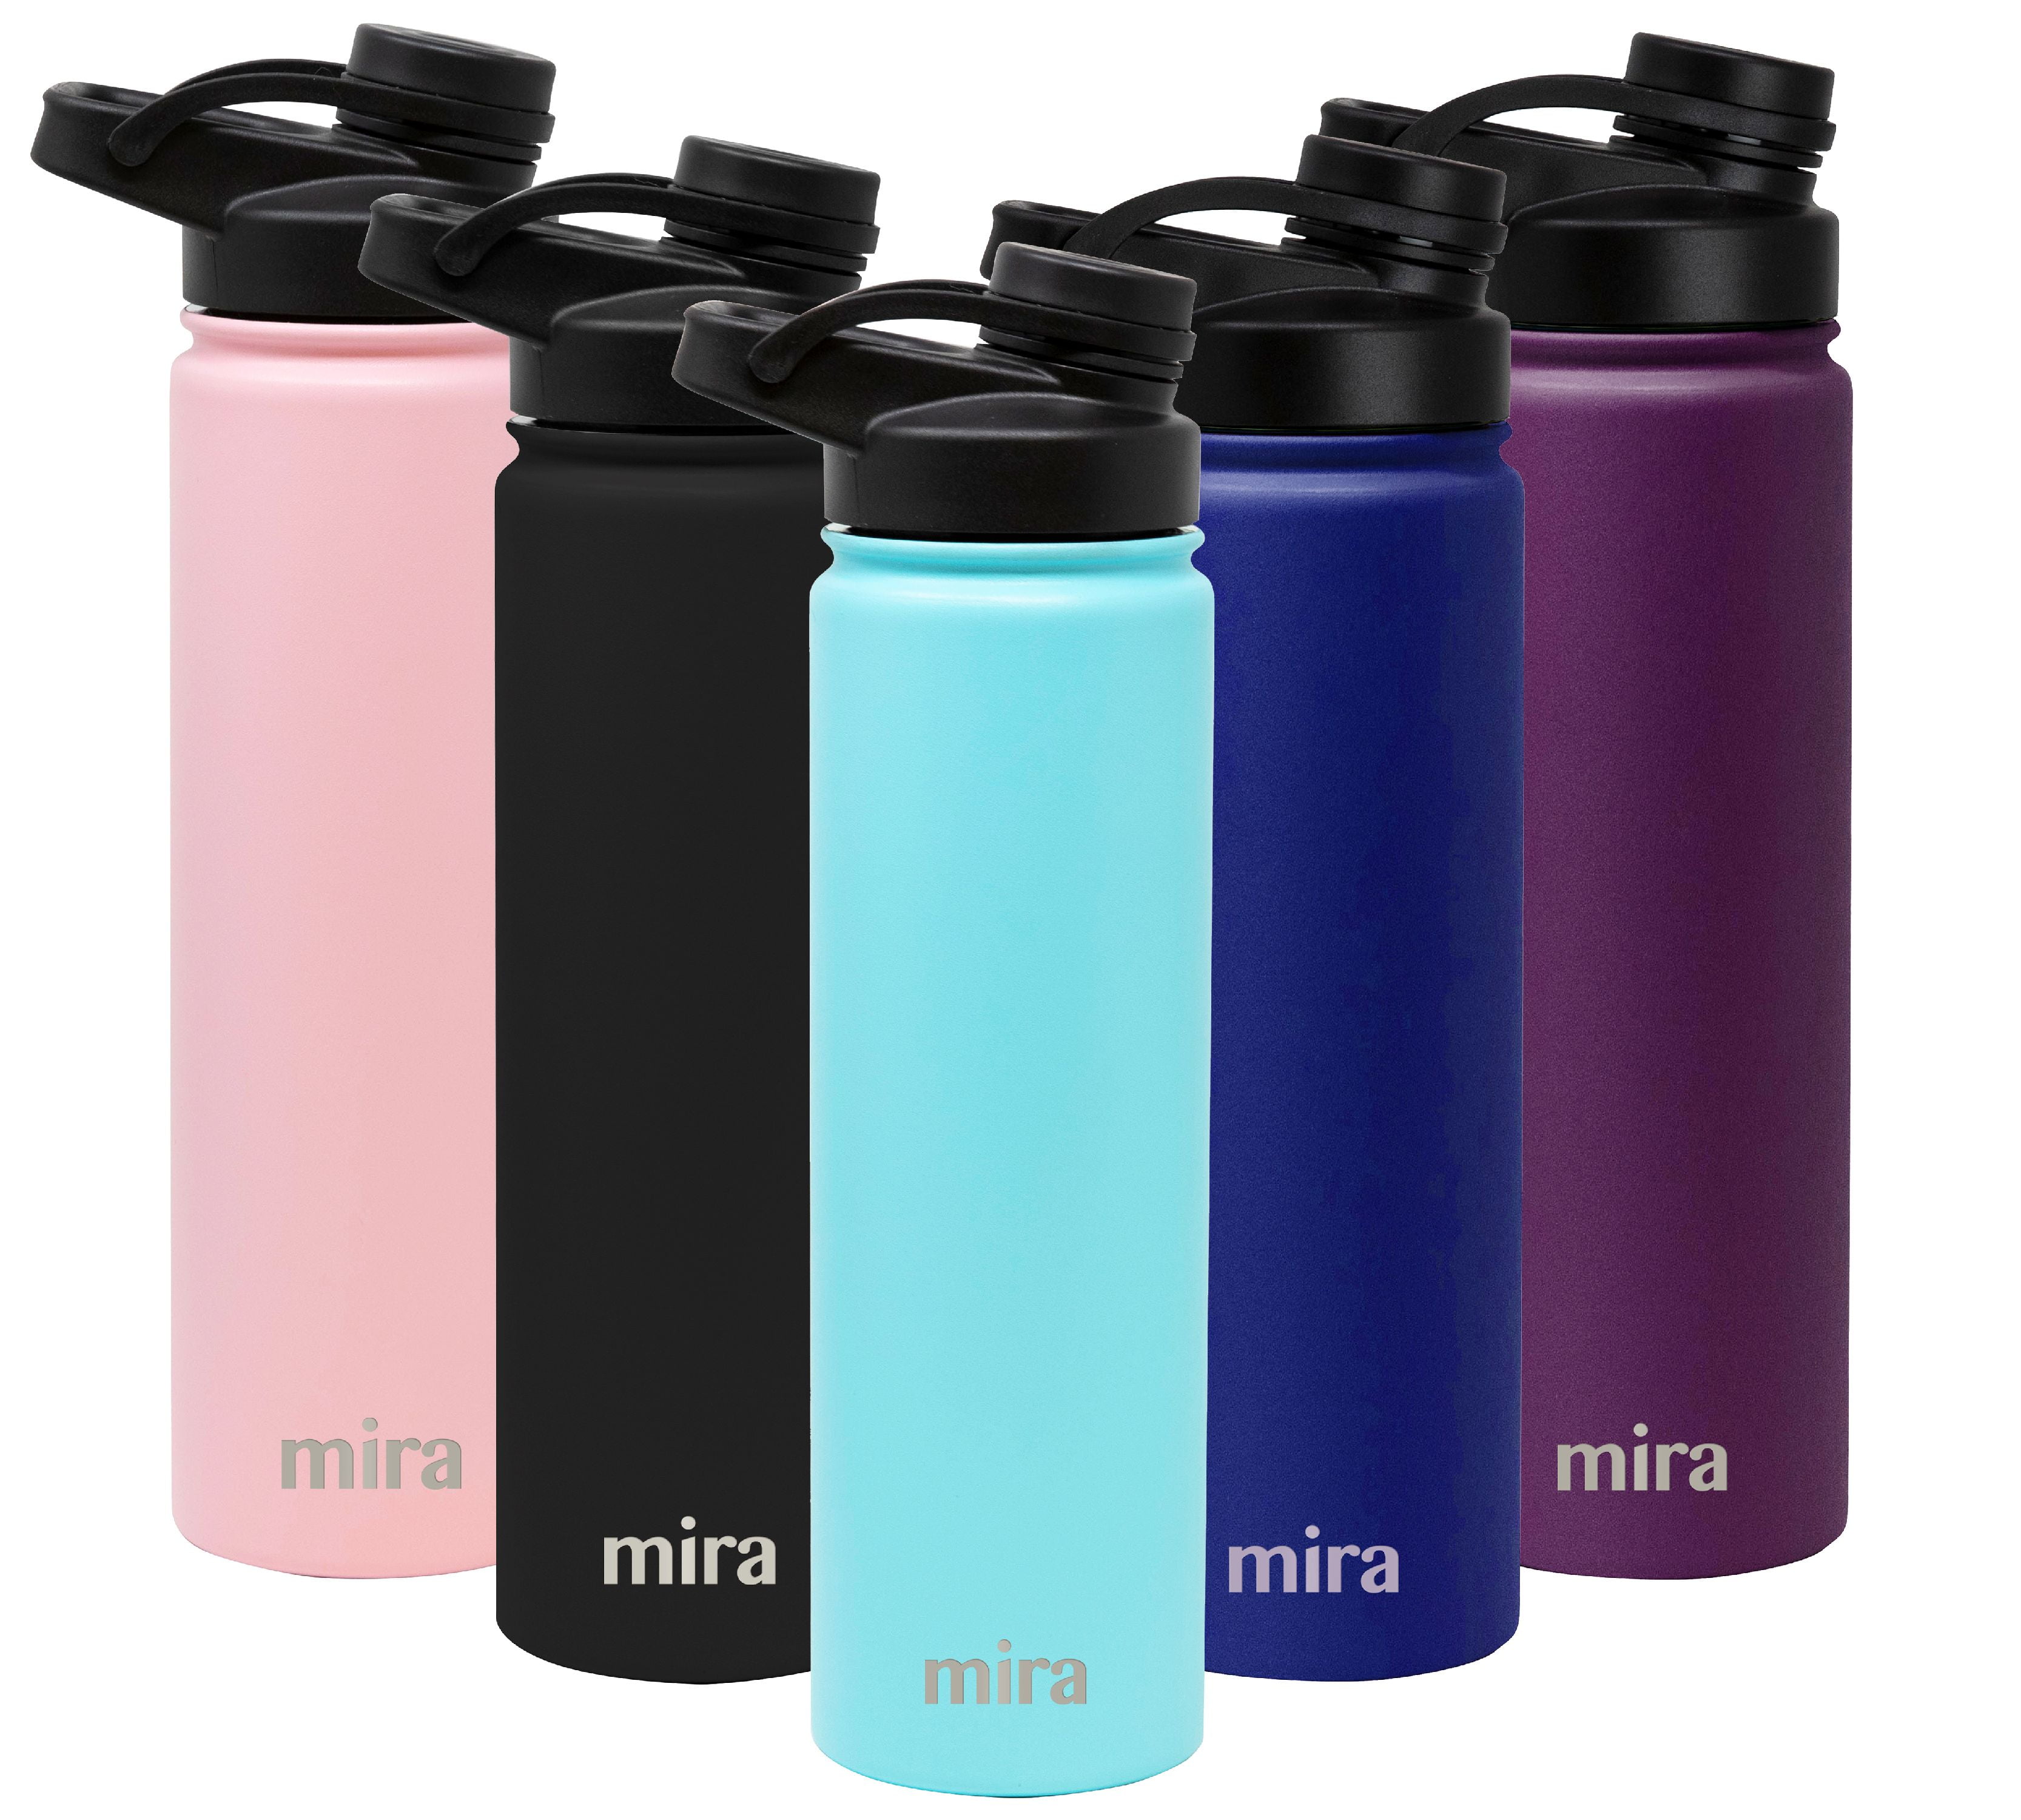 MIRA Stainless Steel Insulated Tea Infuser Bottle for Loose Tea